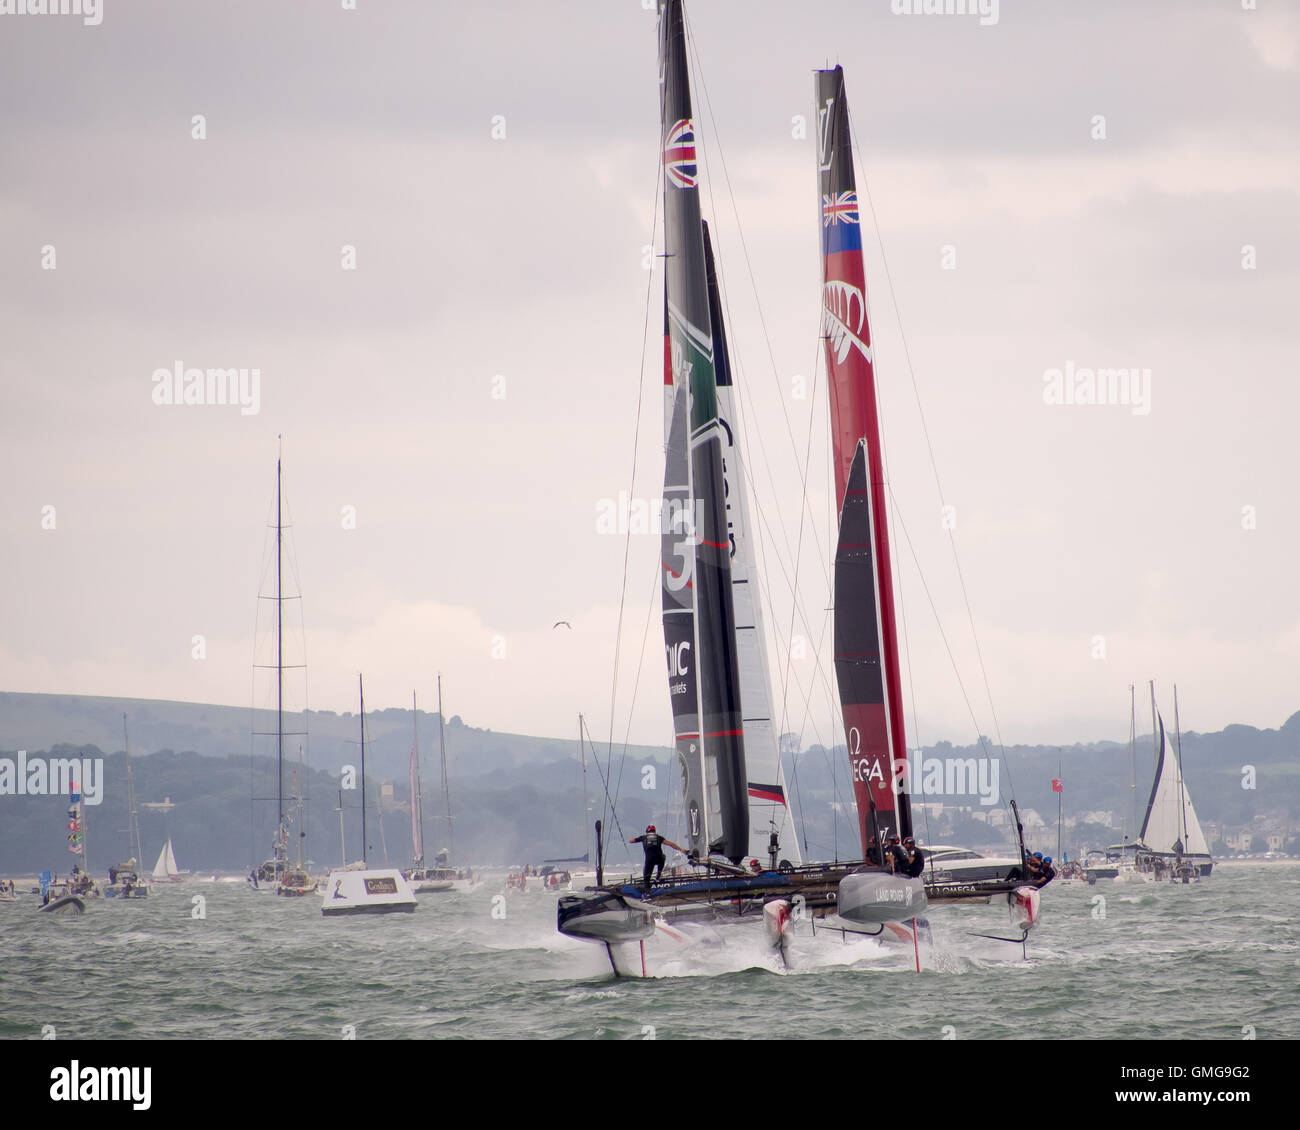 The C45 class catamarans of Team Emirates New Zealand and Ben Ainslie racing at the Americas Cup World Series in Portsmouth 2016 Stock Photo